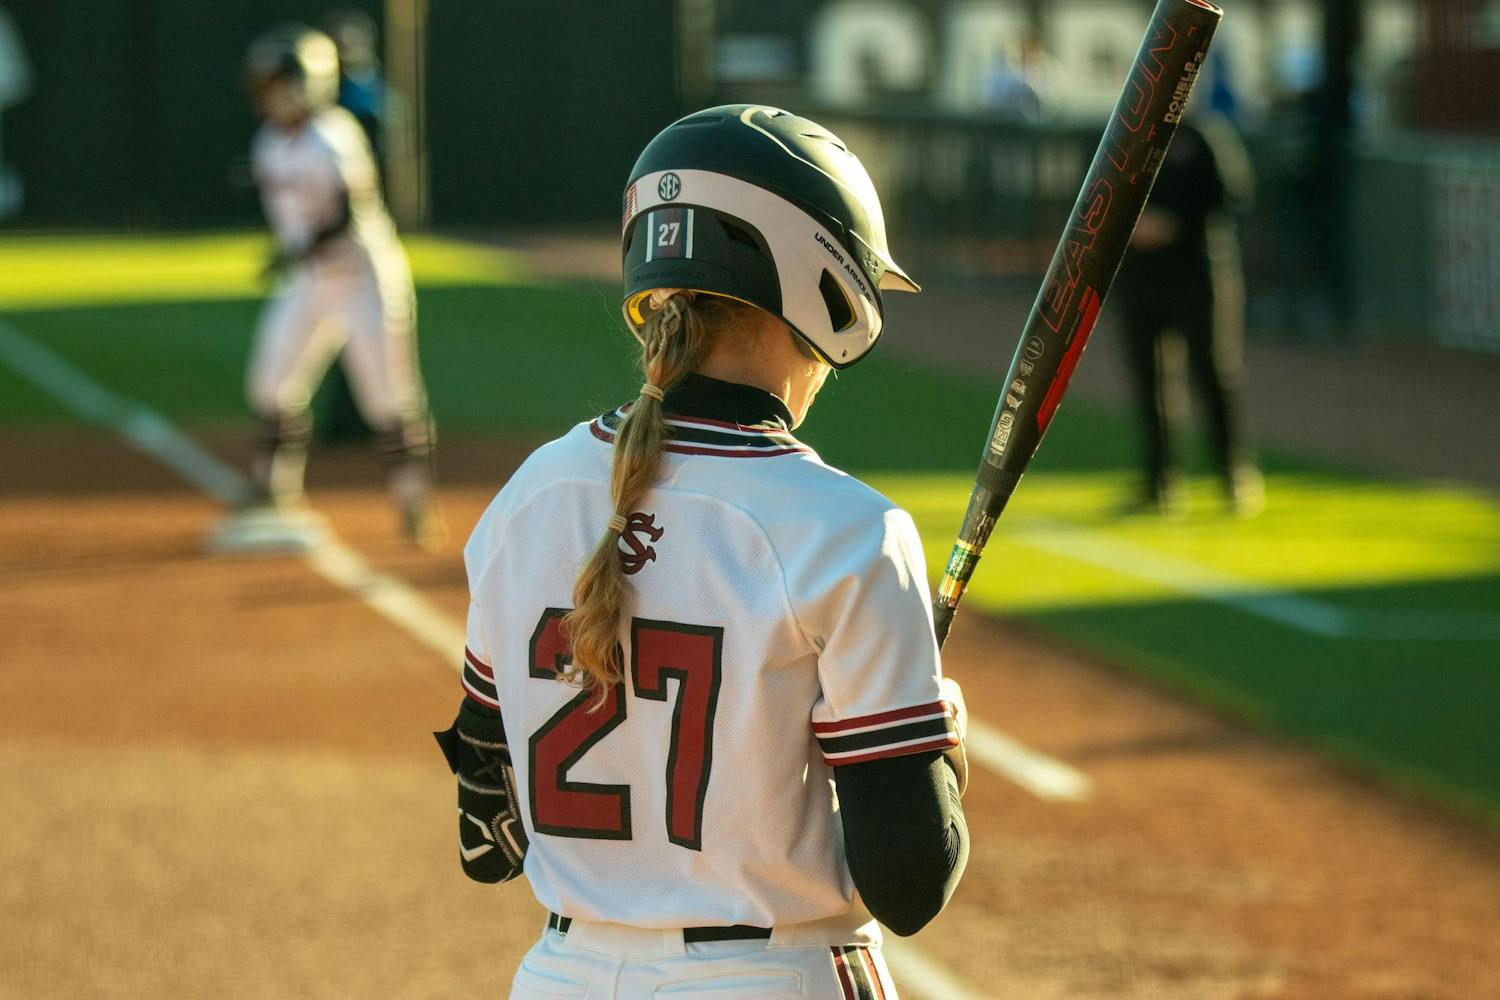 Redshirt senior utility player Kianna Jones stands ready prior to an at-bat during South Carolina’s game against Mississippi State on April 5, 2024. Jones carries a .272 batting average and was 0-3 in the ɫɫƵs 6-0 loss to the Bulldogs.